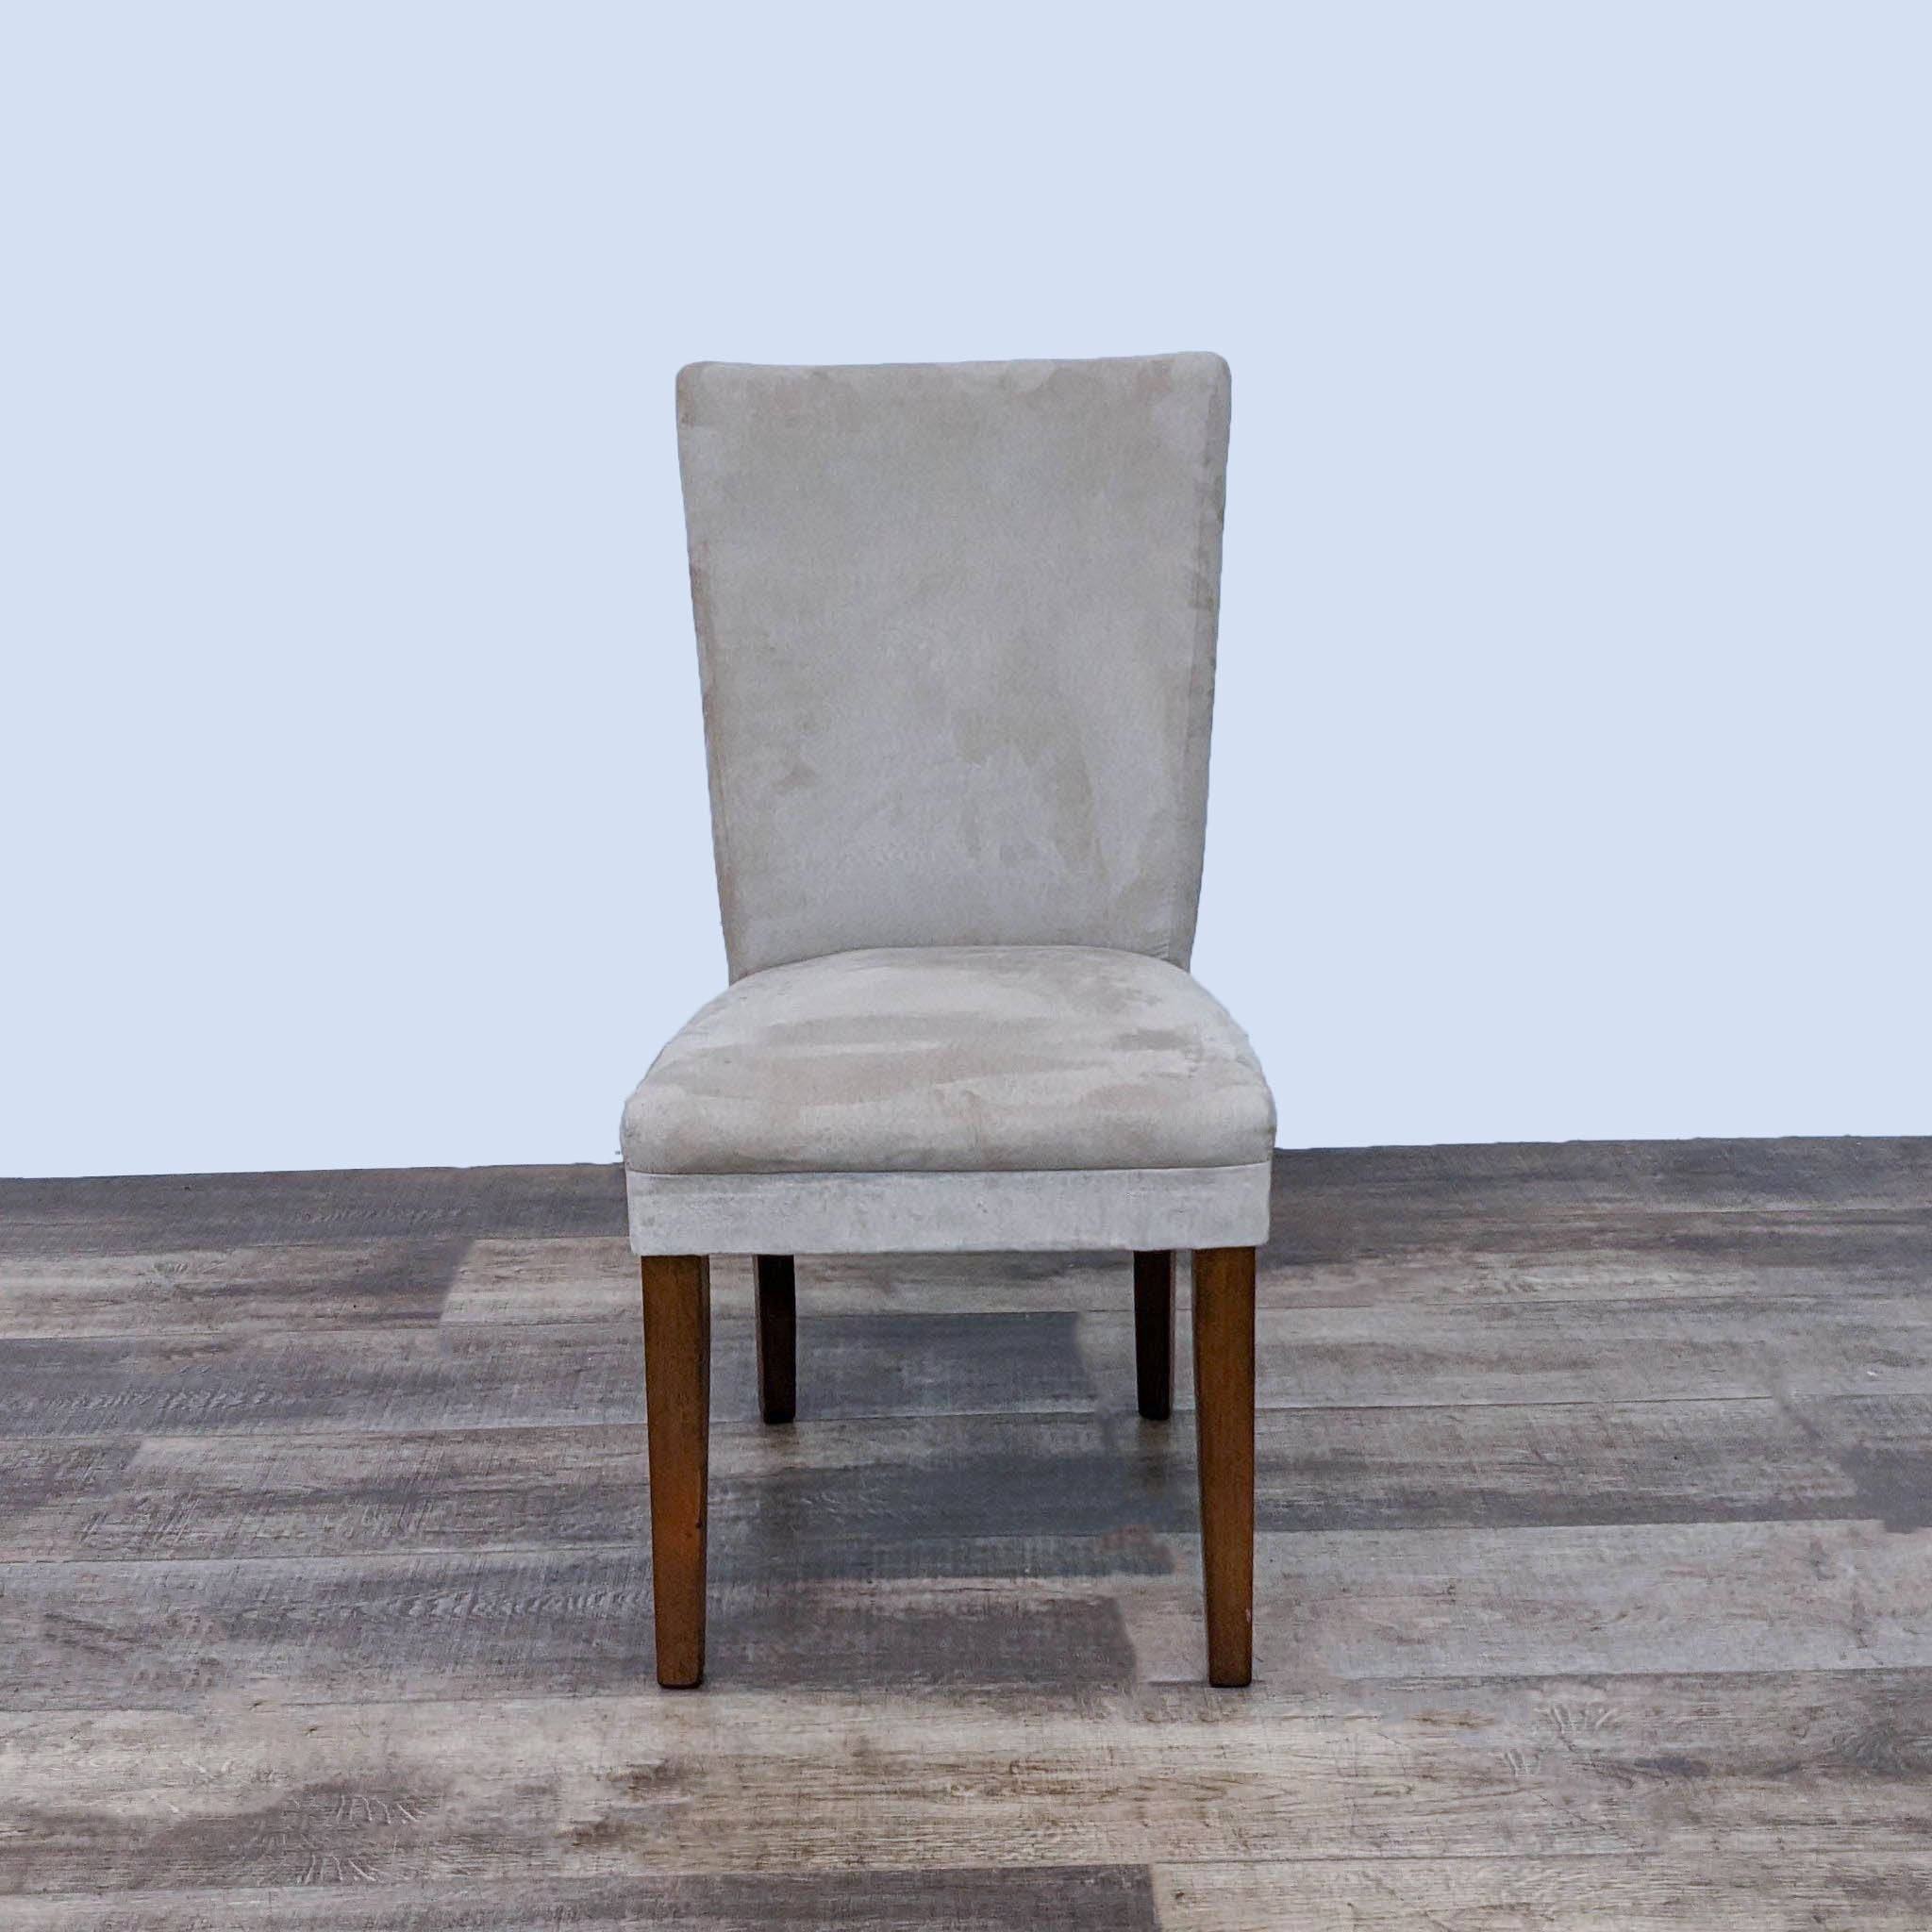 Reperch Parsons dining chair with light gray faux suede and wooden legs, front view on wooden floor.